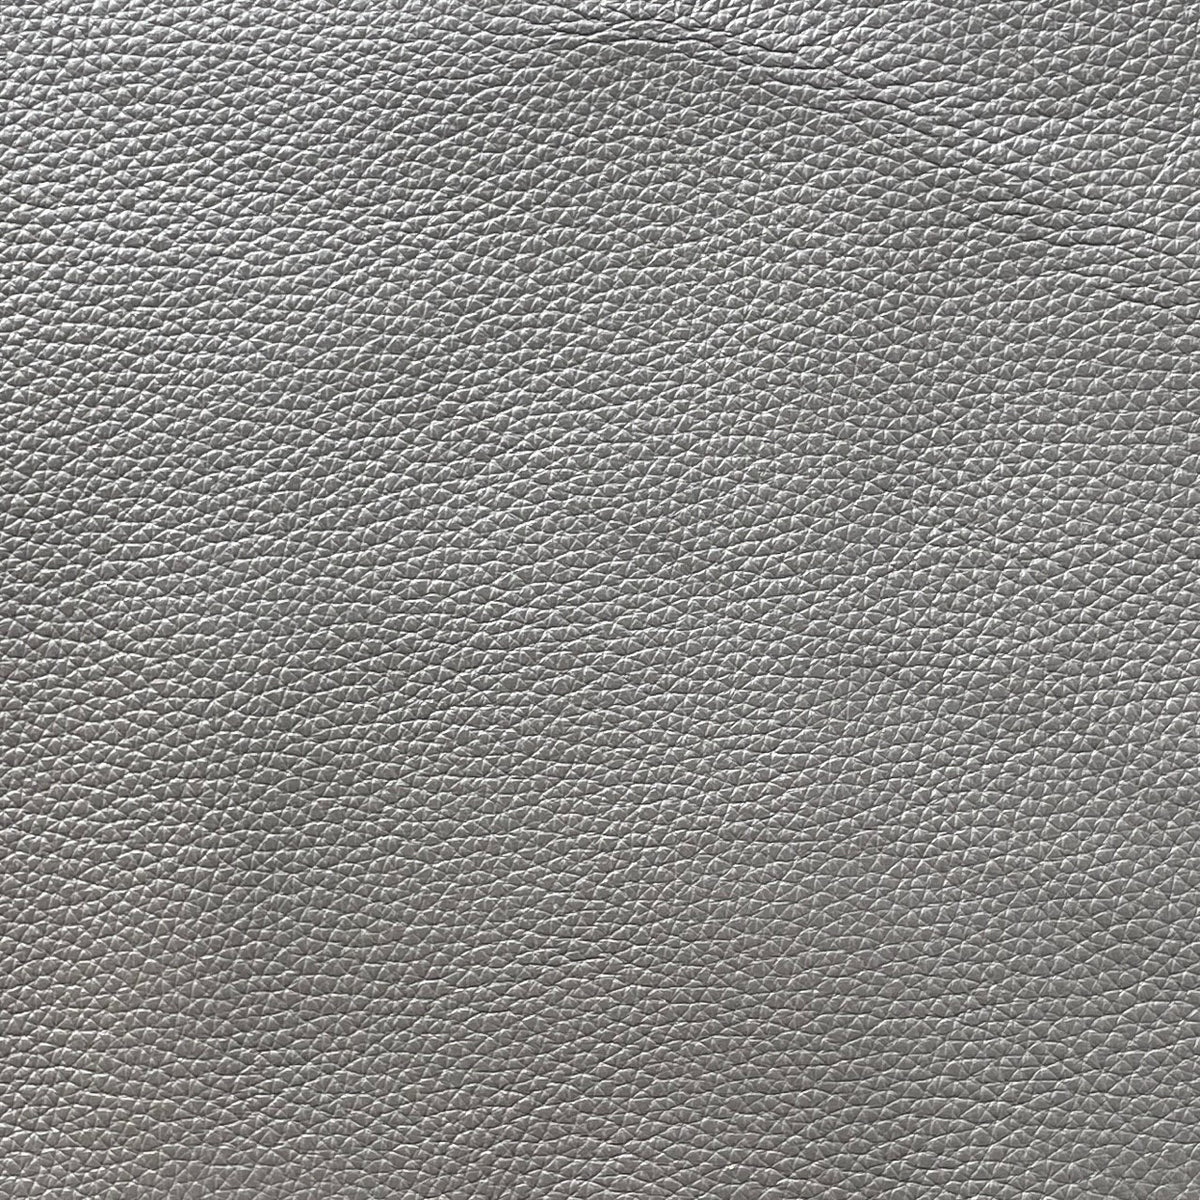 Upholstery Cow Side #34 | Grey | 1.8 mm | 30.17 sq.ft | $210 ea.